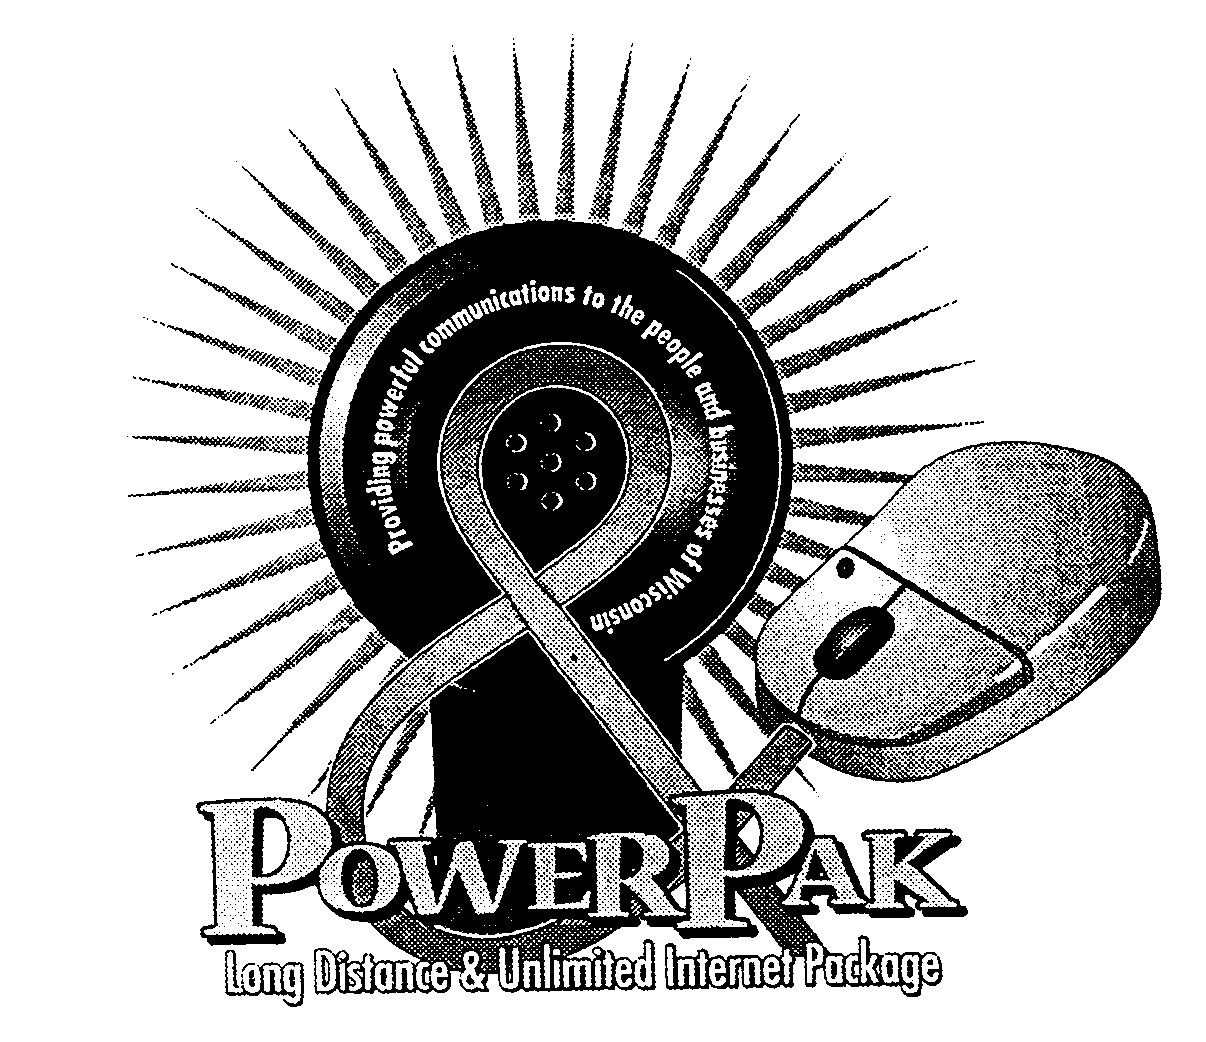  PROVIDING POWERFULL COMMUNICATION TO THE PEOPLE AND BUSINESS OF WISCONSIN POWERPAK LONG DISTANCE &amp; UNLIMITED INTERNET PACKAG